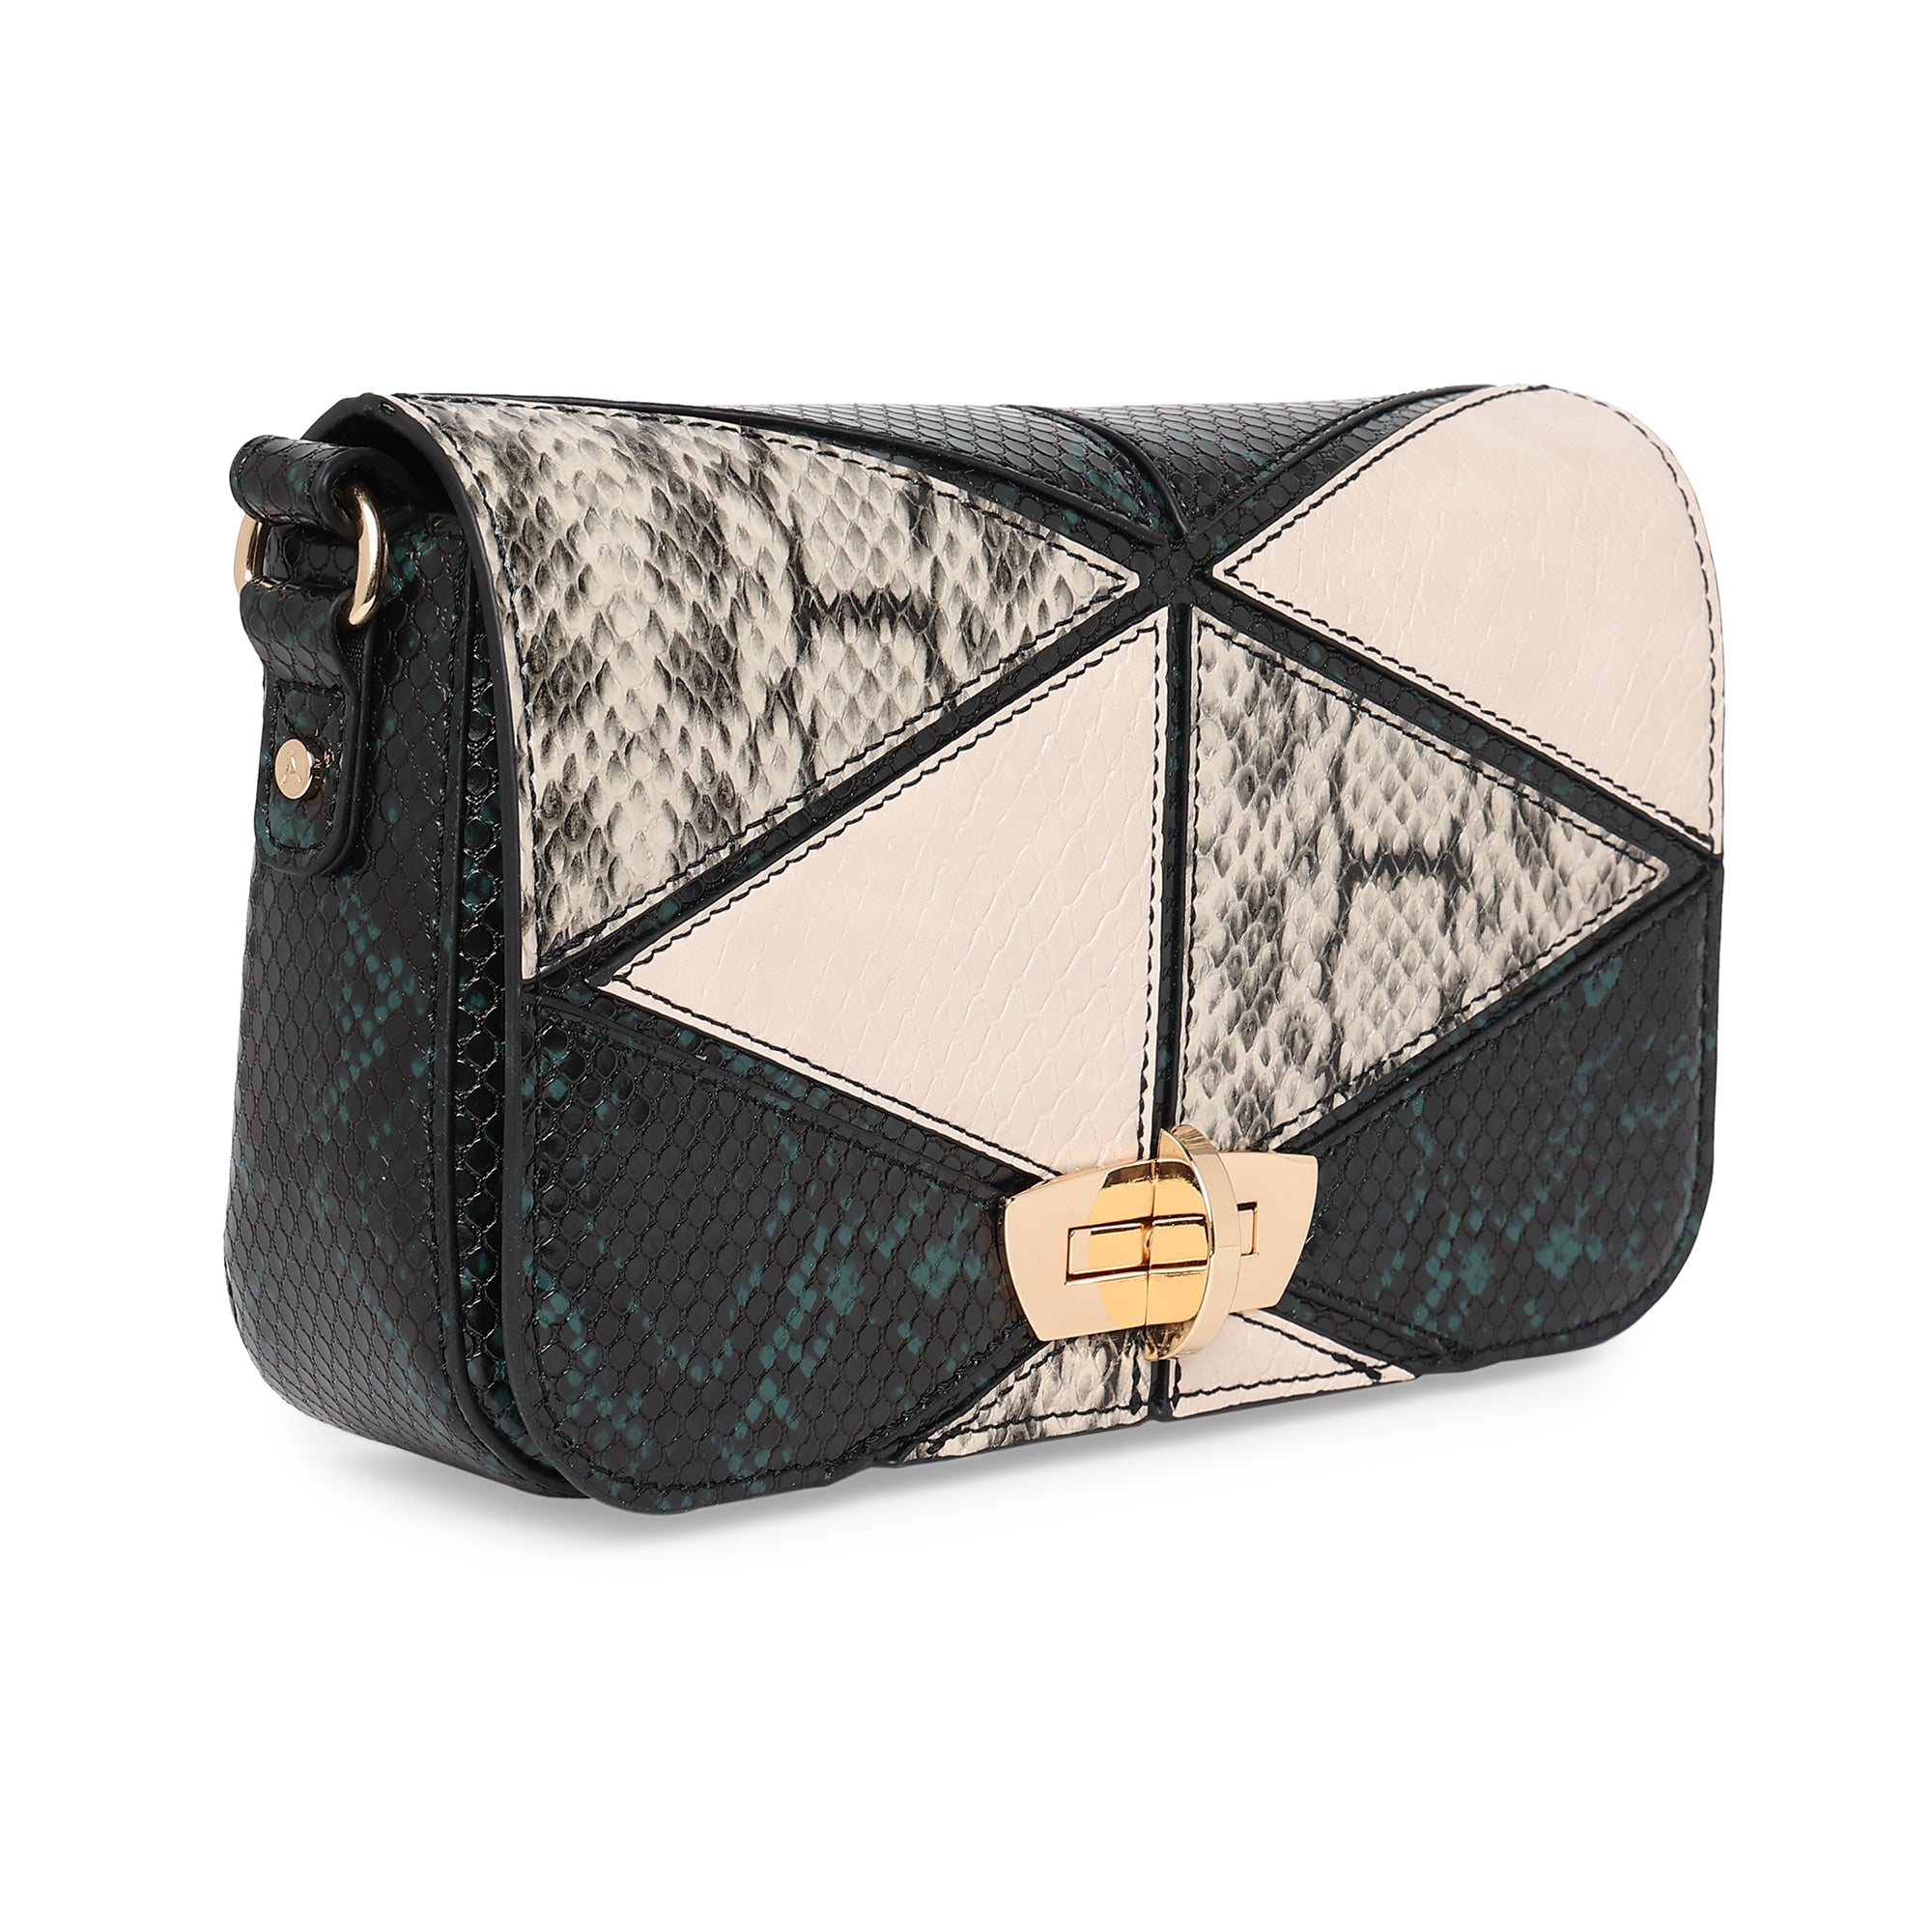 Flat 60% Off On Women's Bags - Accessorize India